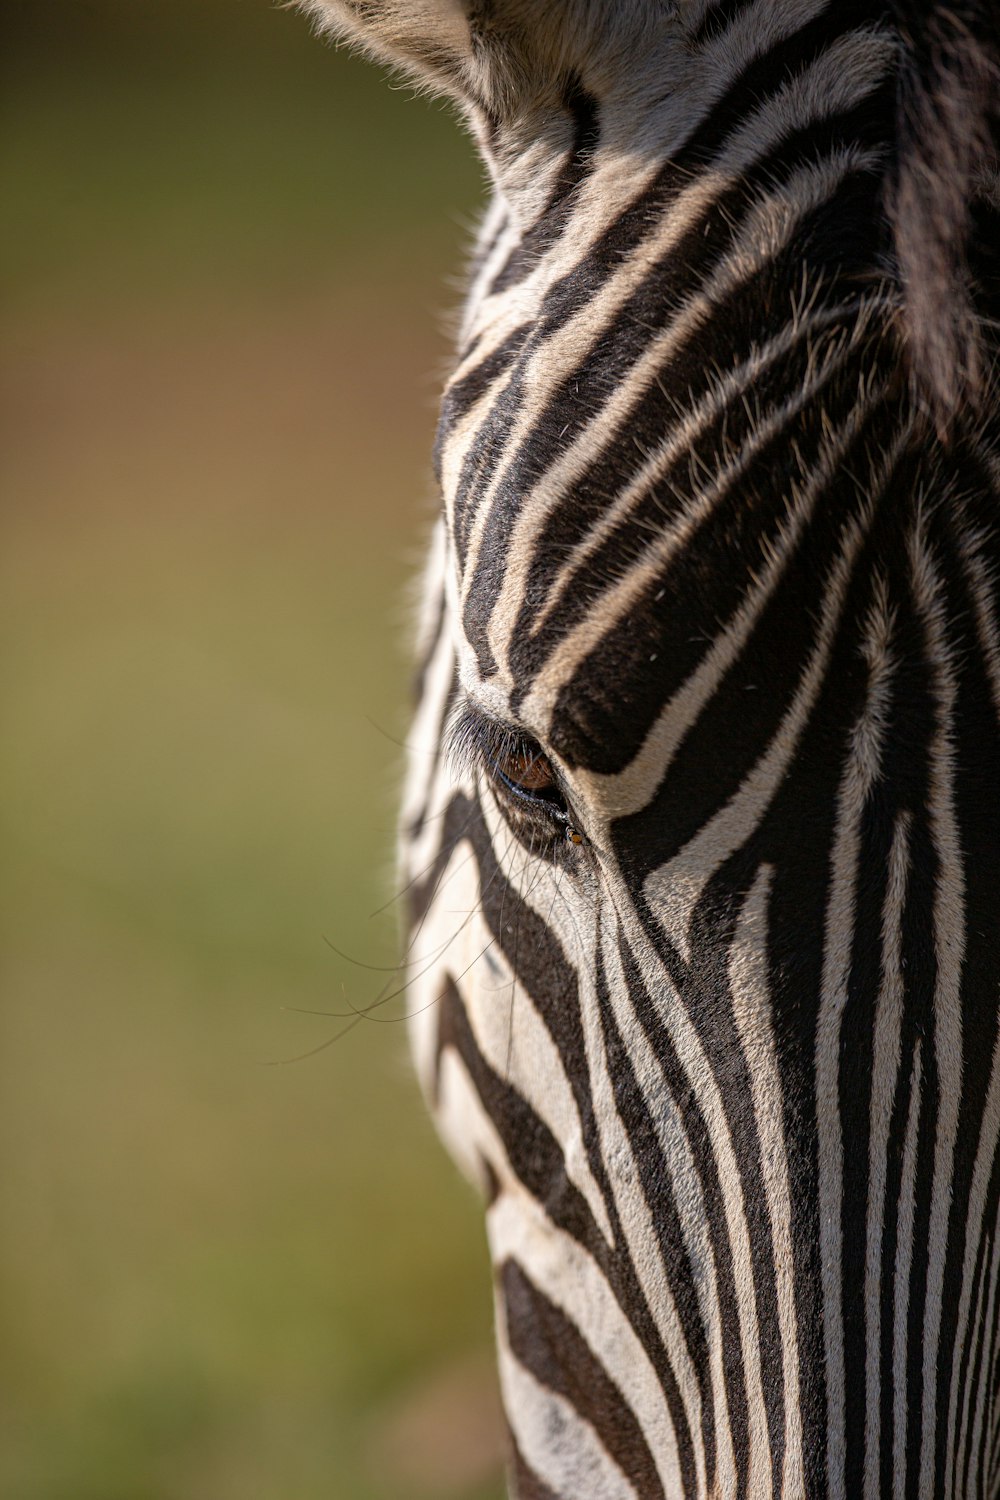 black and white zebra in close up photography during daytime